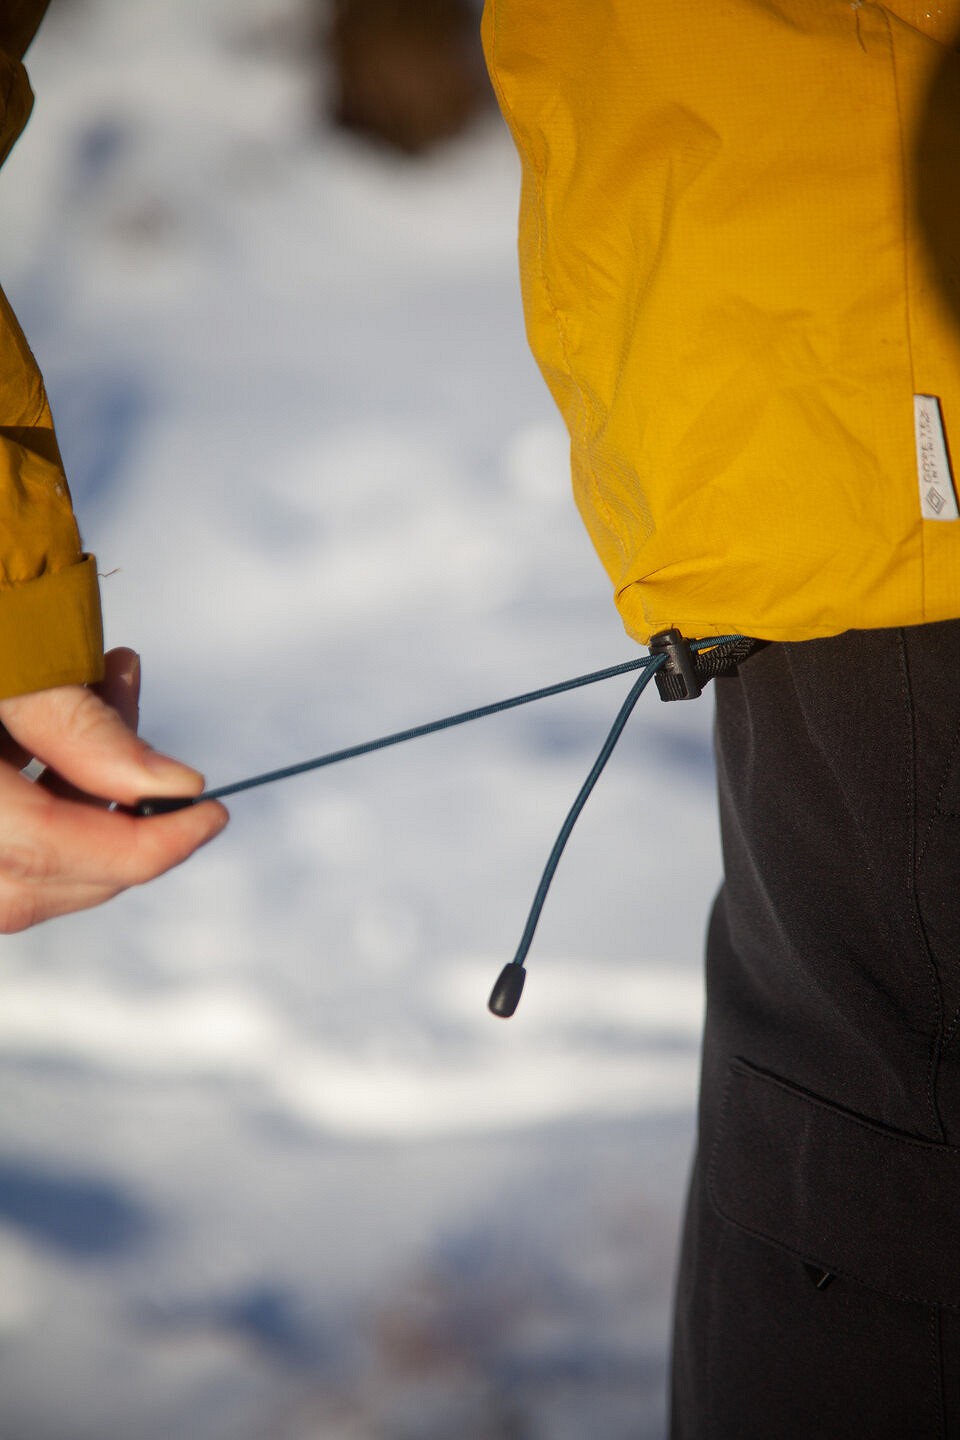 Anti-snag draw cord on either side works well  © UKC Gear